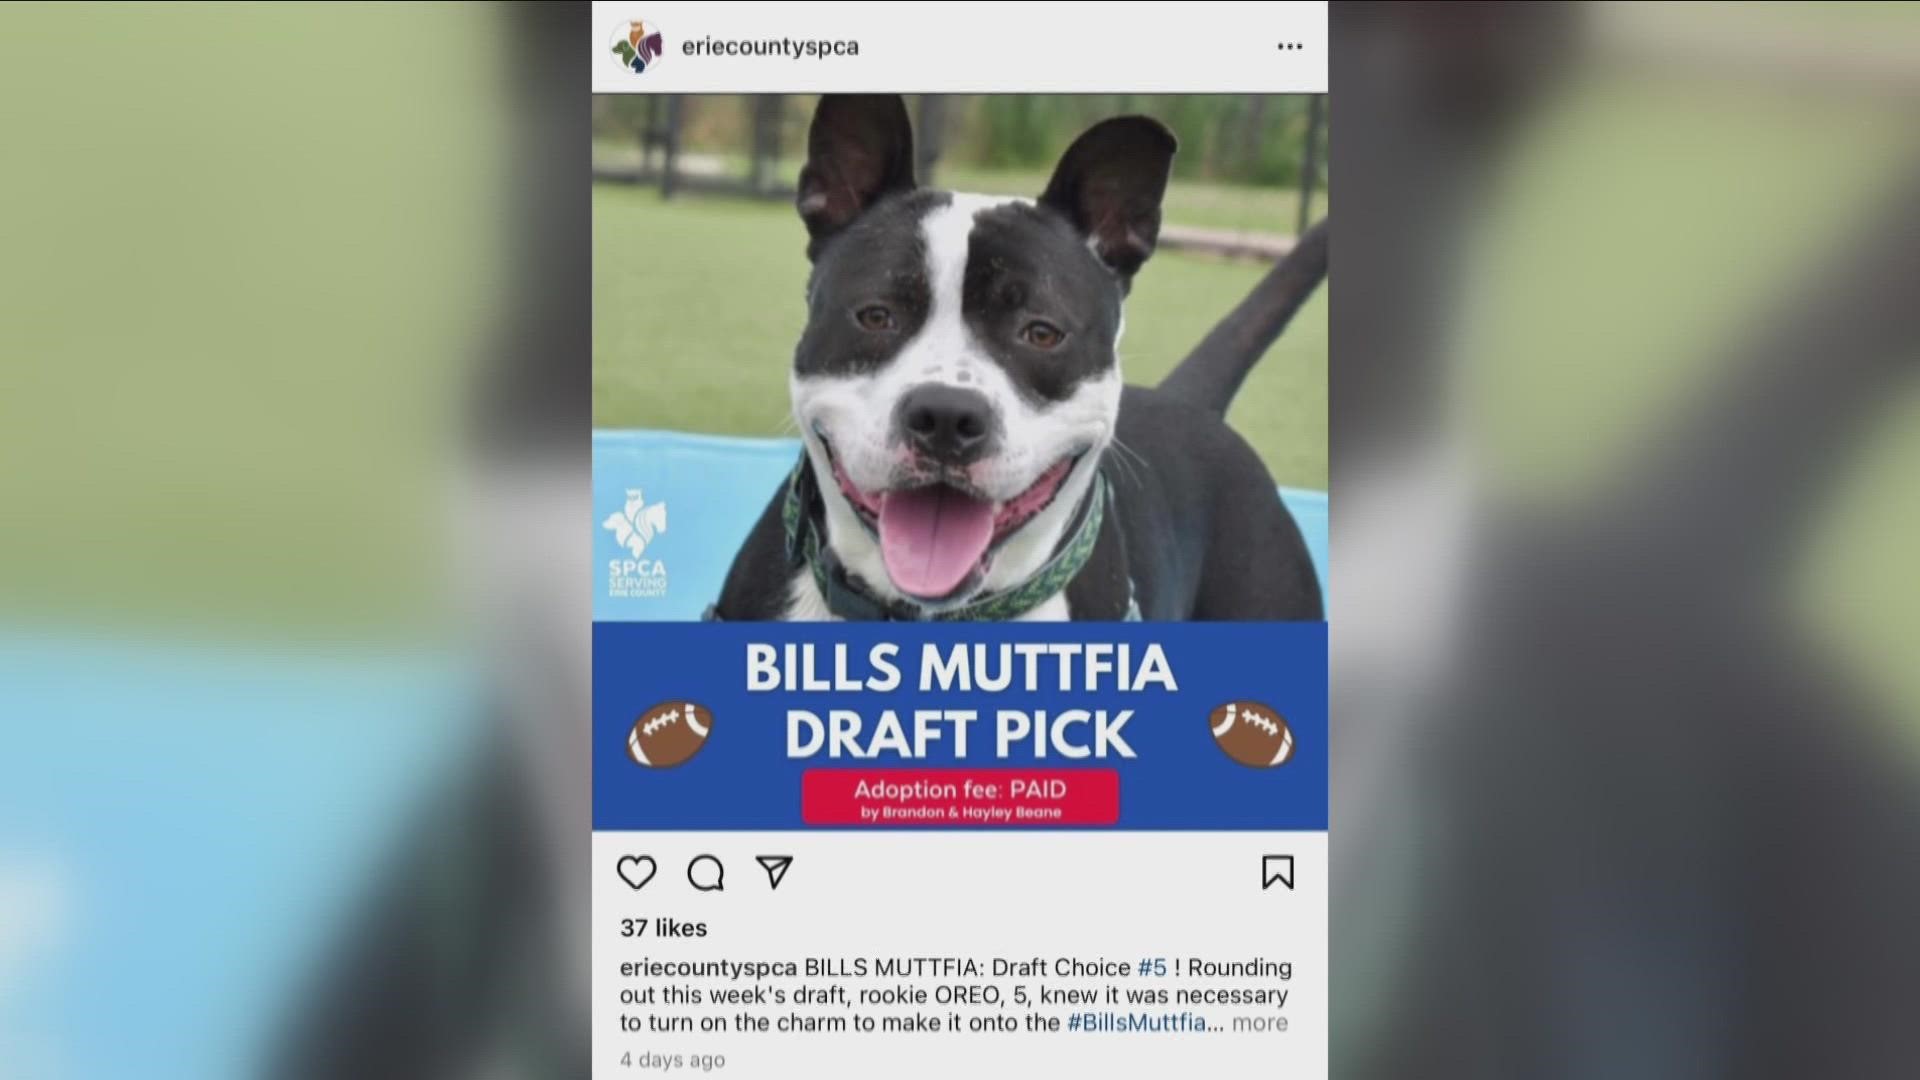 The Buffalo Bills GM's wife, Haley Beane, announced on Twitter that they will make additional donations to the SPCA Serving Erie County.